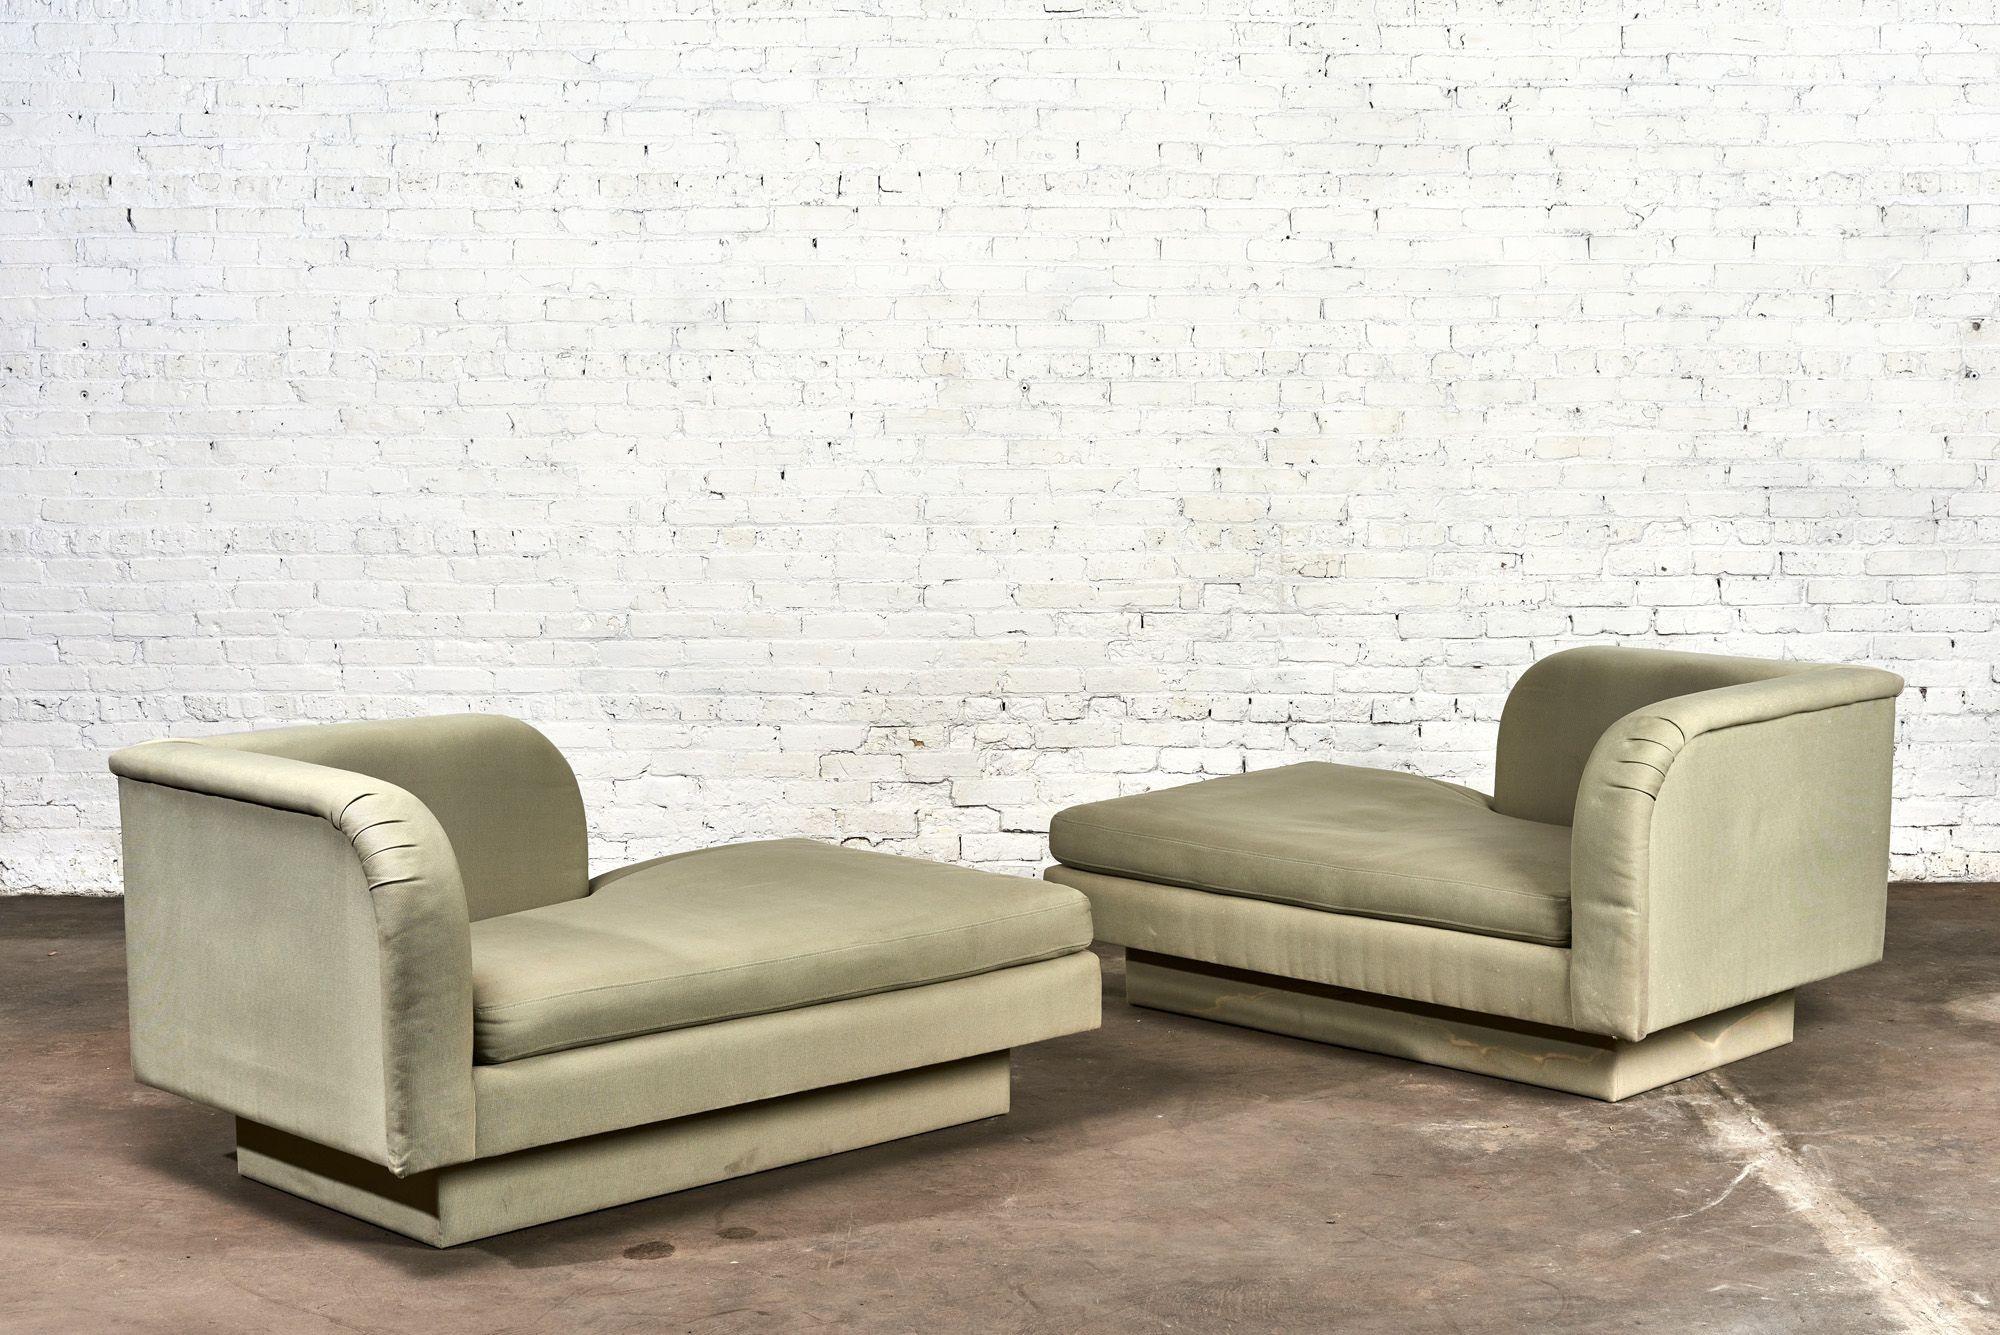 Late 20th Century Pair Post Modern Chaise Lounges, 1980